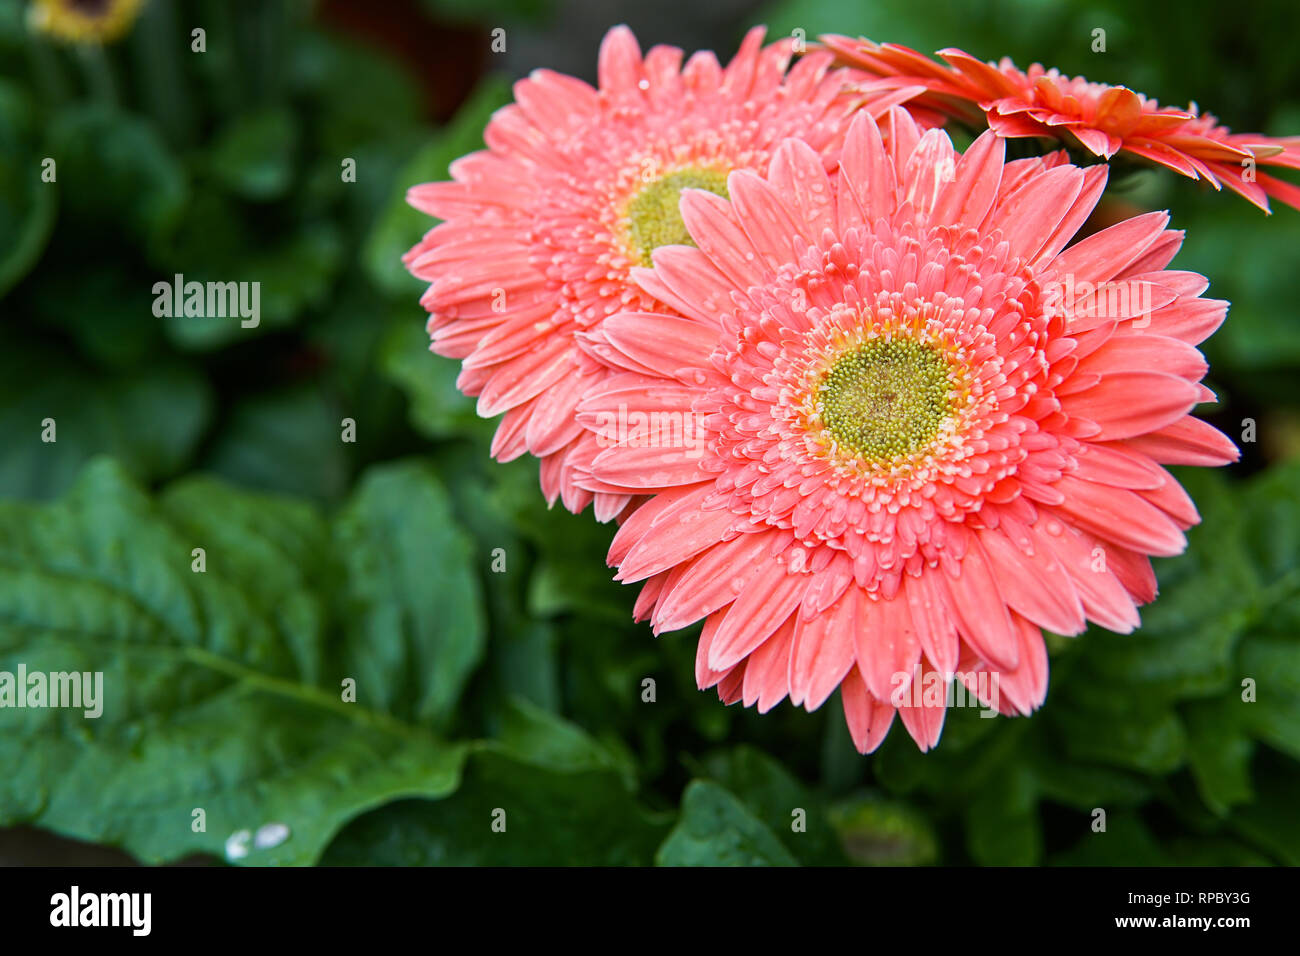 Close up of fresh Gerbera Daisies with water droplet on leaf background- Image Stock Photo